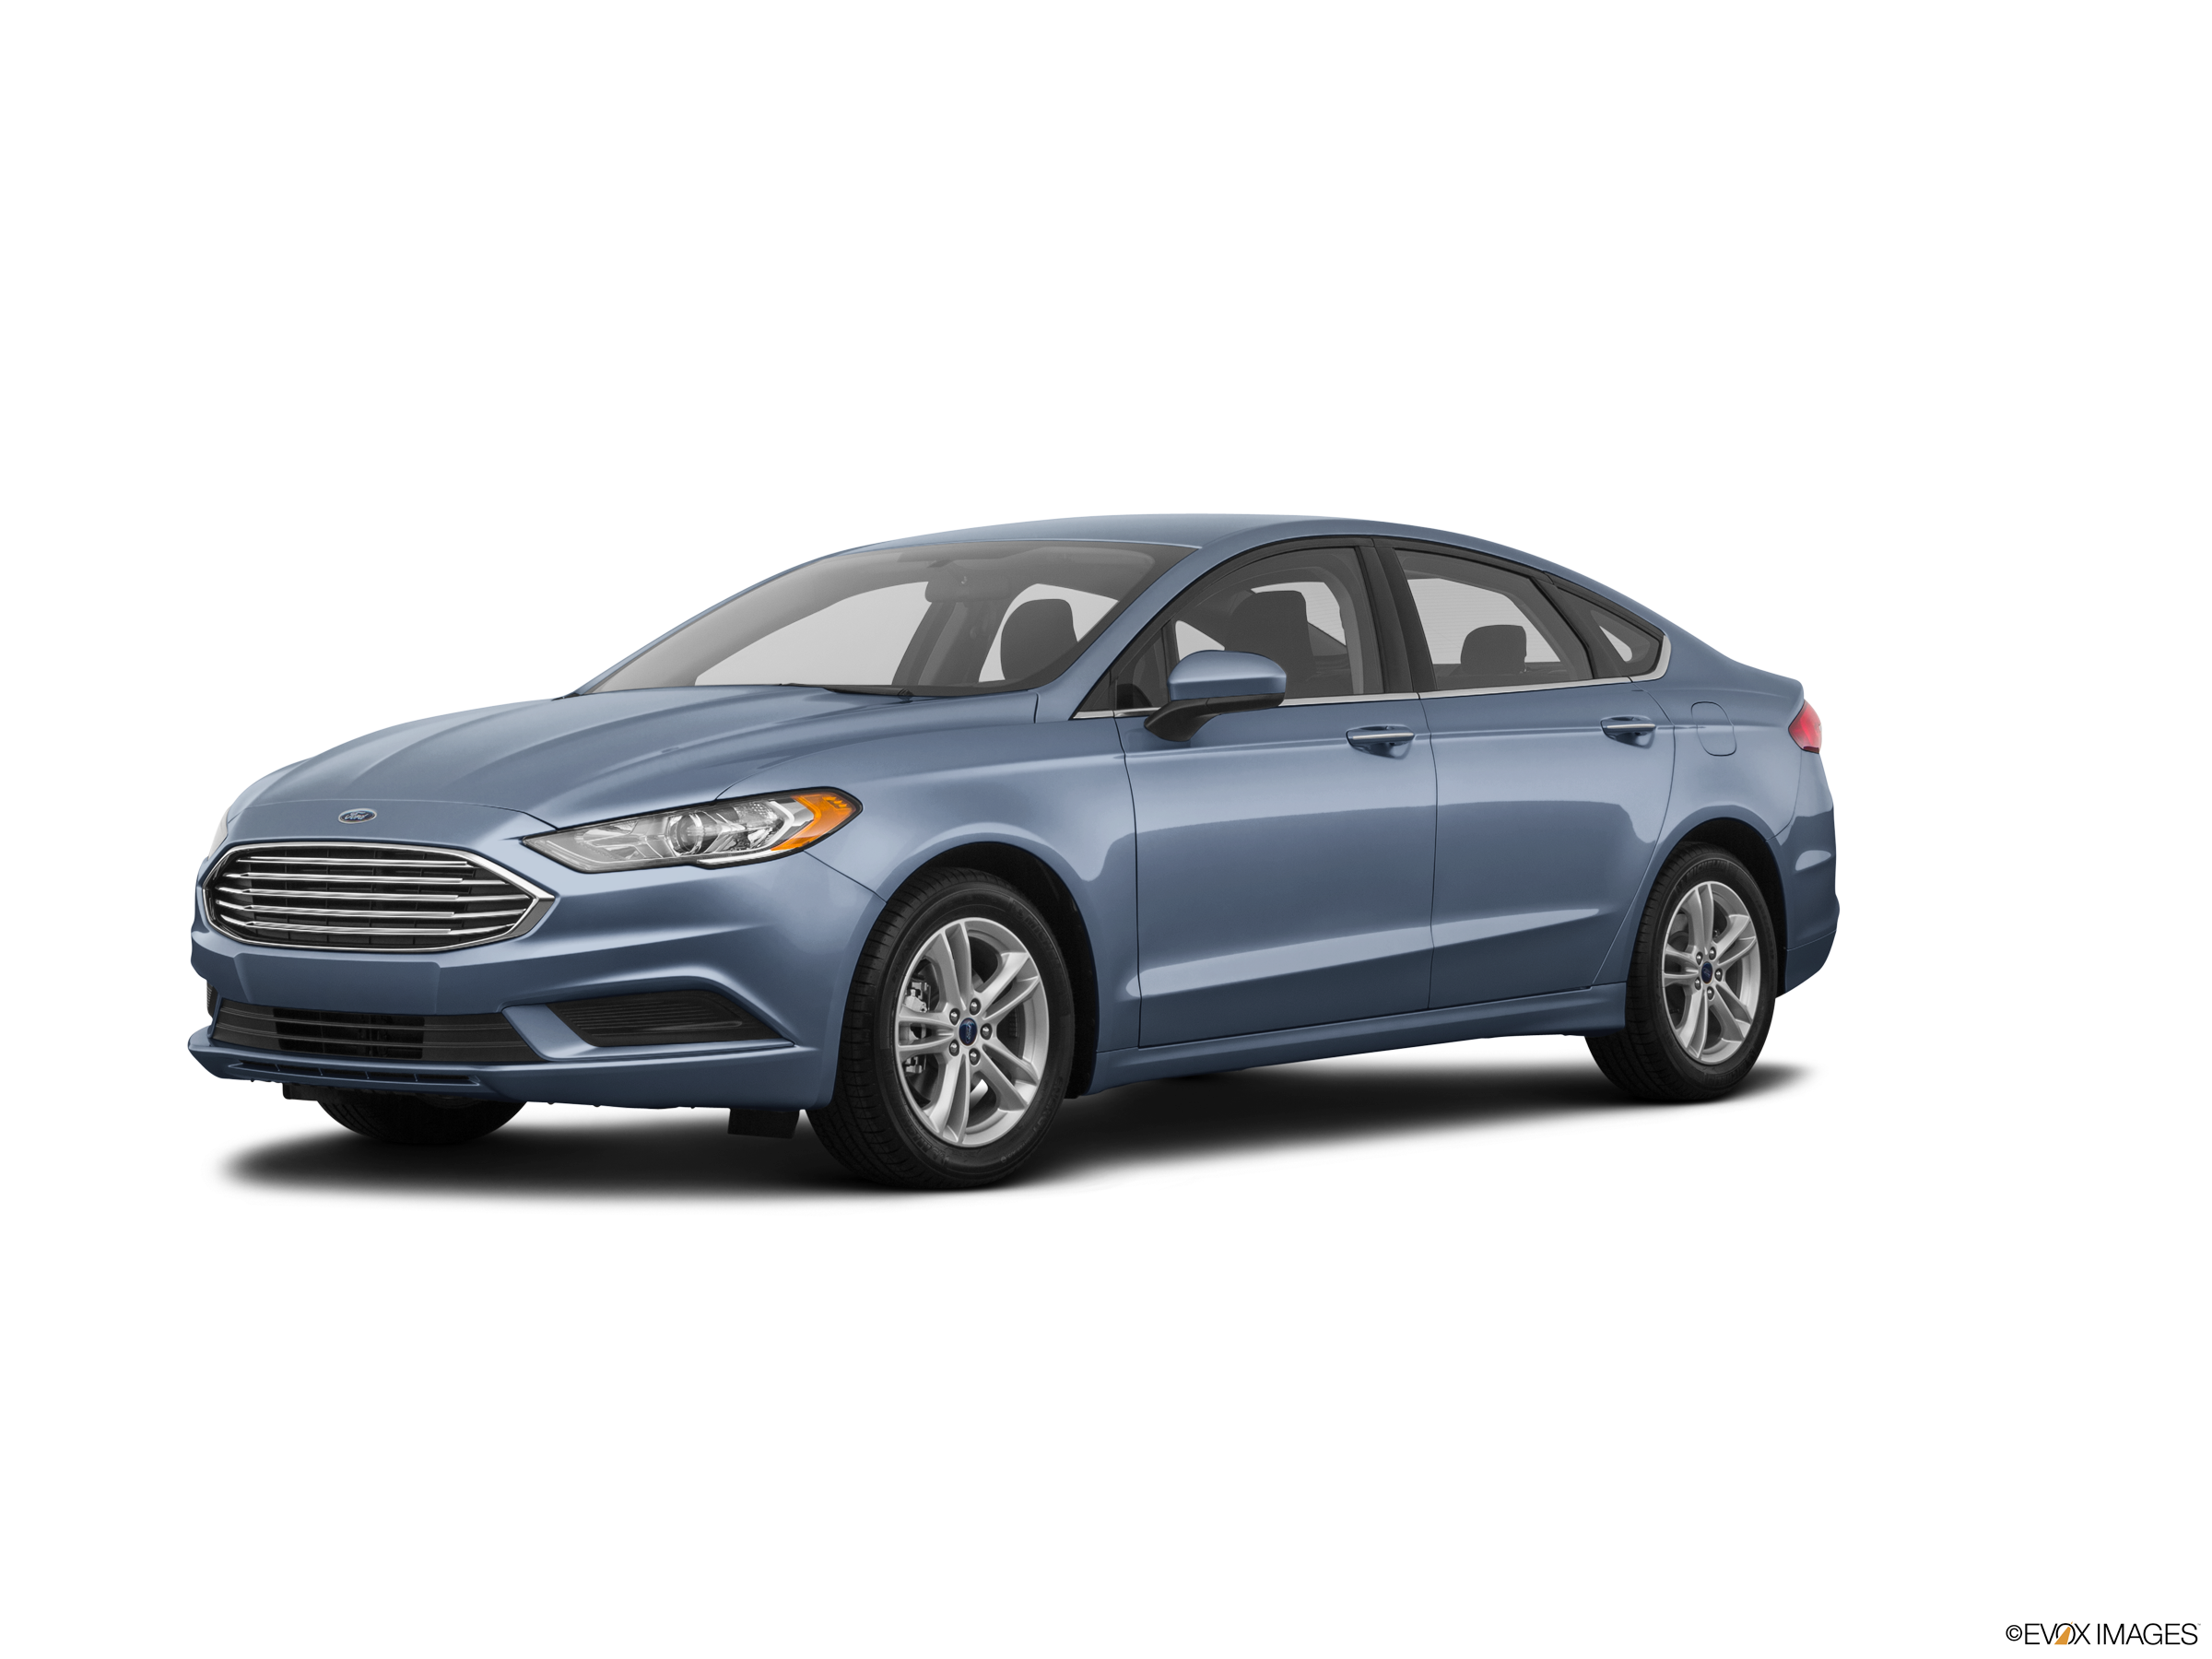 https://file.kelleybluebookimages.com/kbb/base/evox/CP/12239/2018-Ford-Fusion-front_12239_032_2400x1800_FT.png